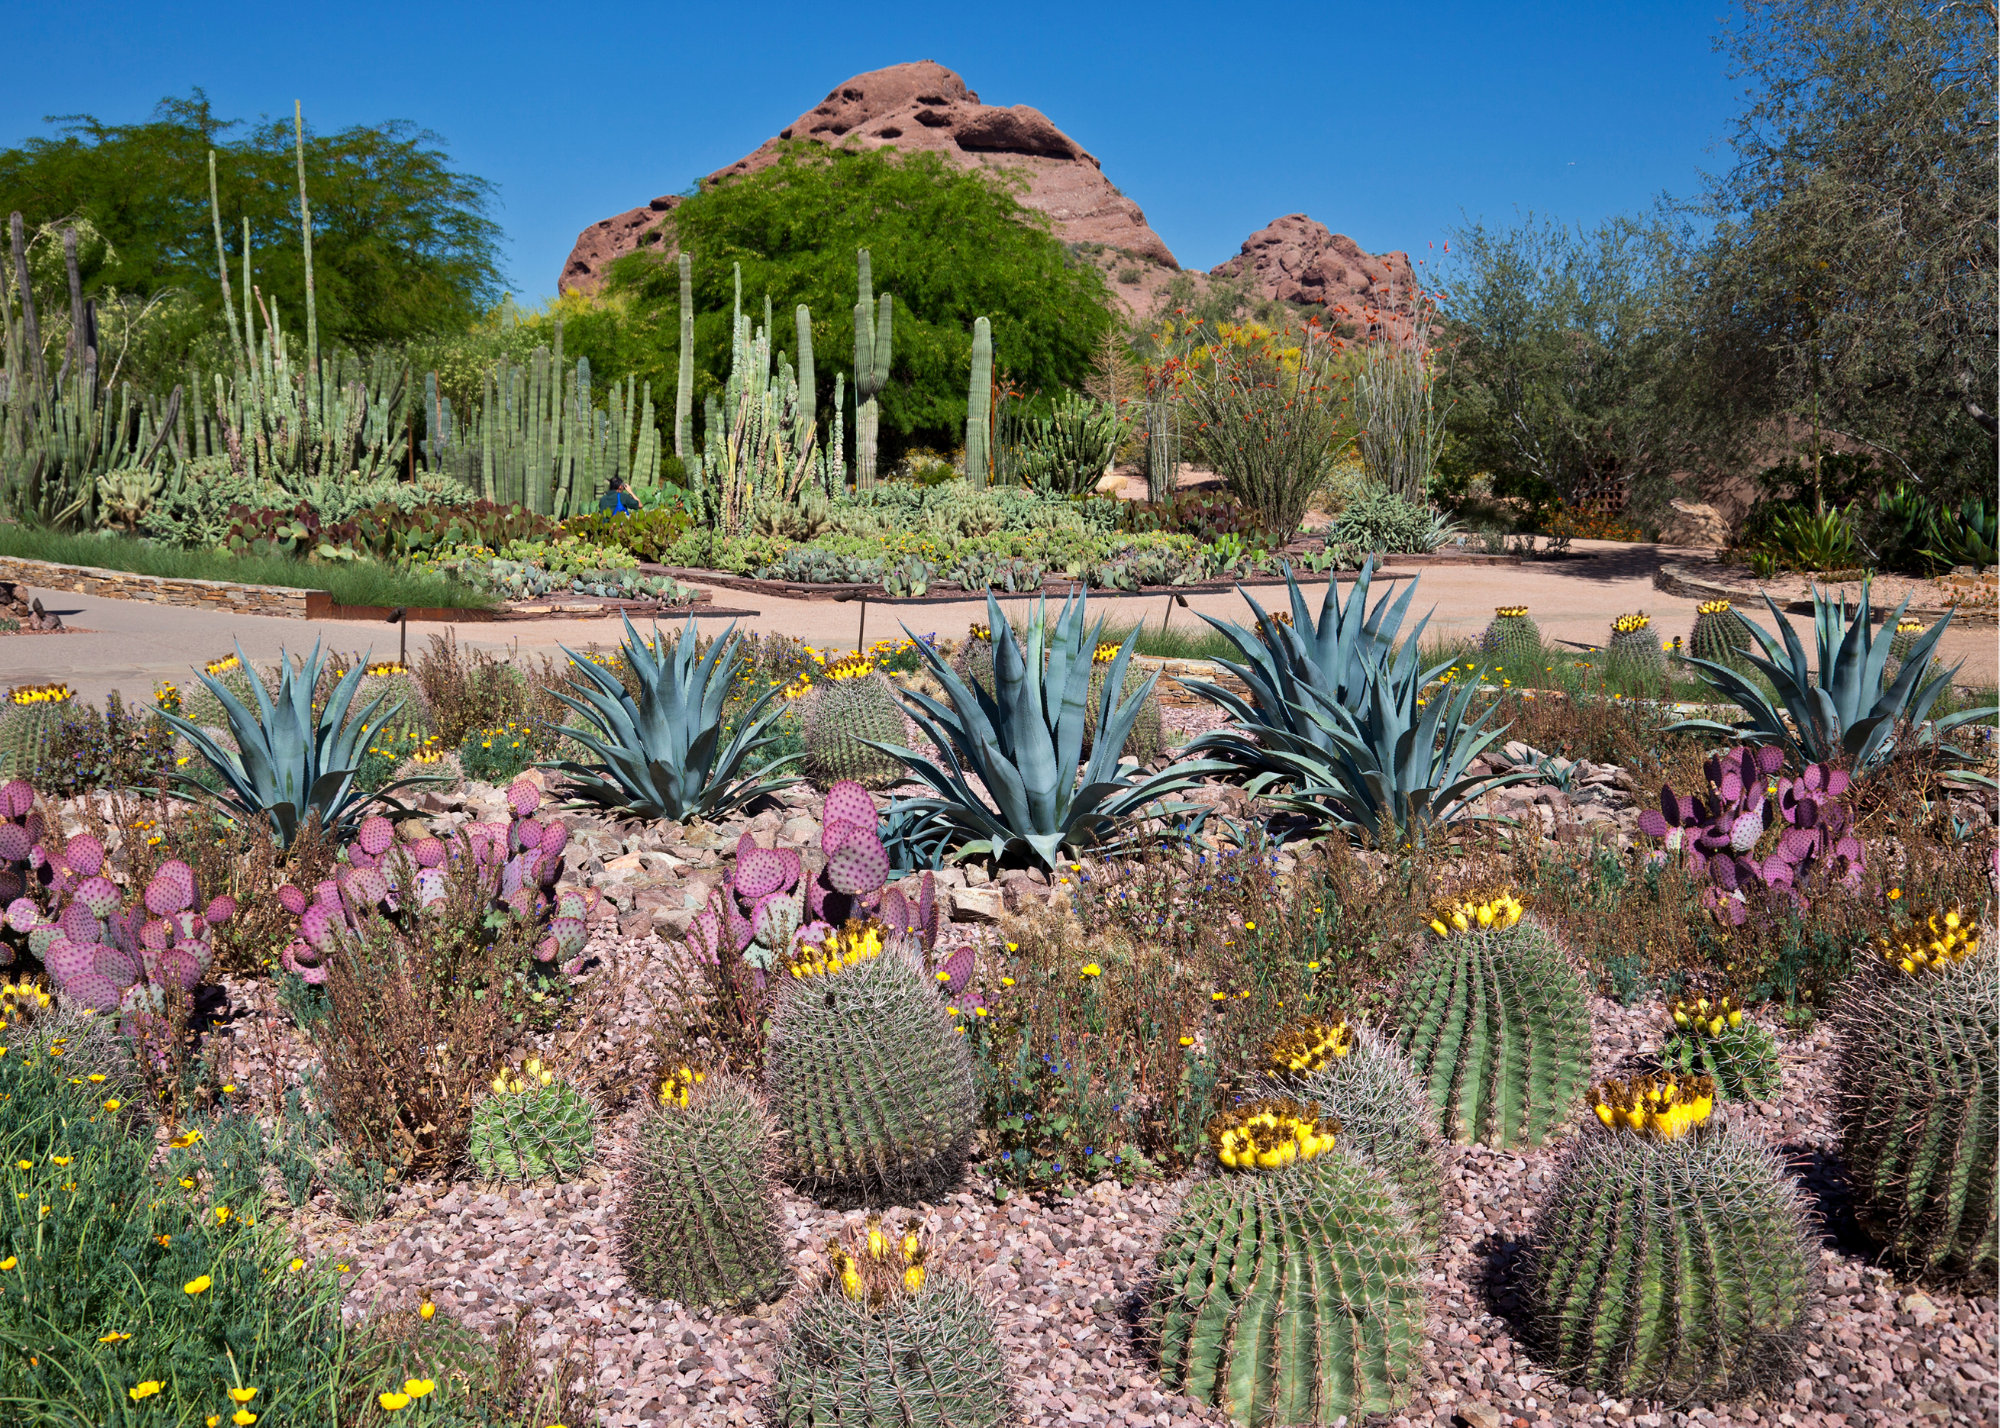 Image of Desert Botanical Garden, home to hundreds of species of cacti and succulents from desert communities, displayed in ways that highlight these wonders of the desert.